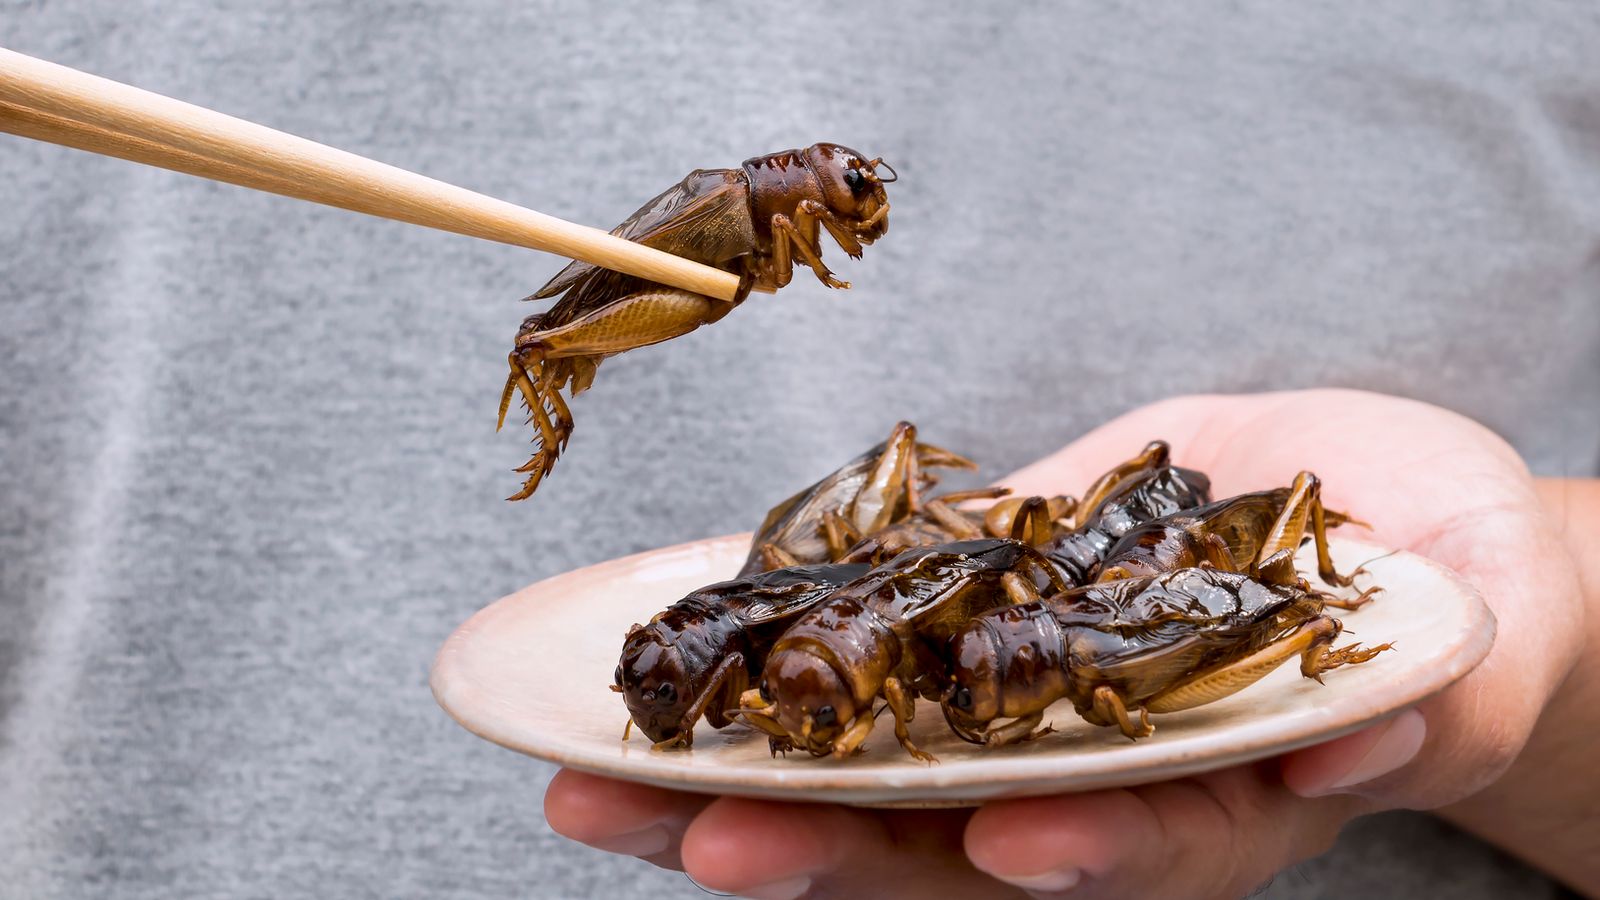 ‘Disgust factor’ must be overcome if planet-friendly insect food to become mainstream